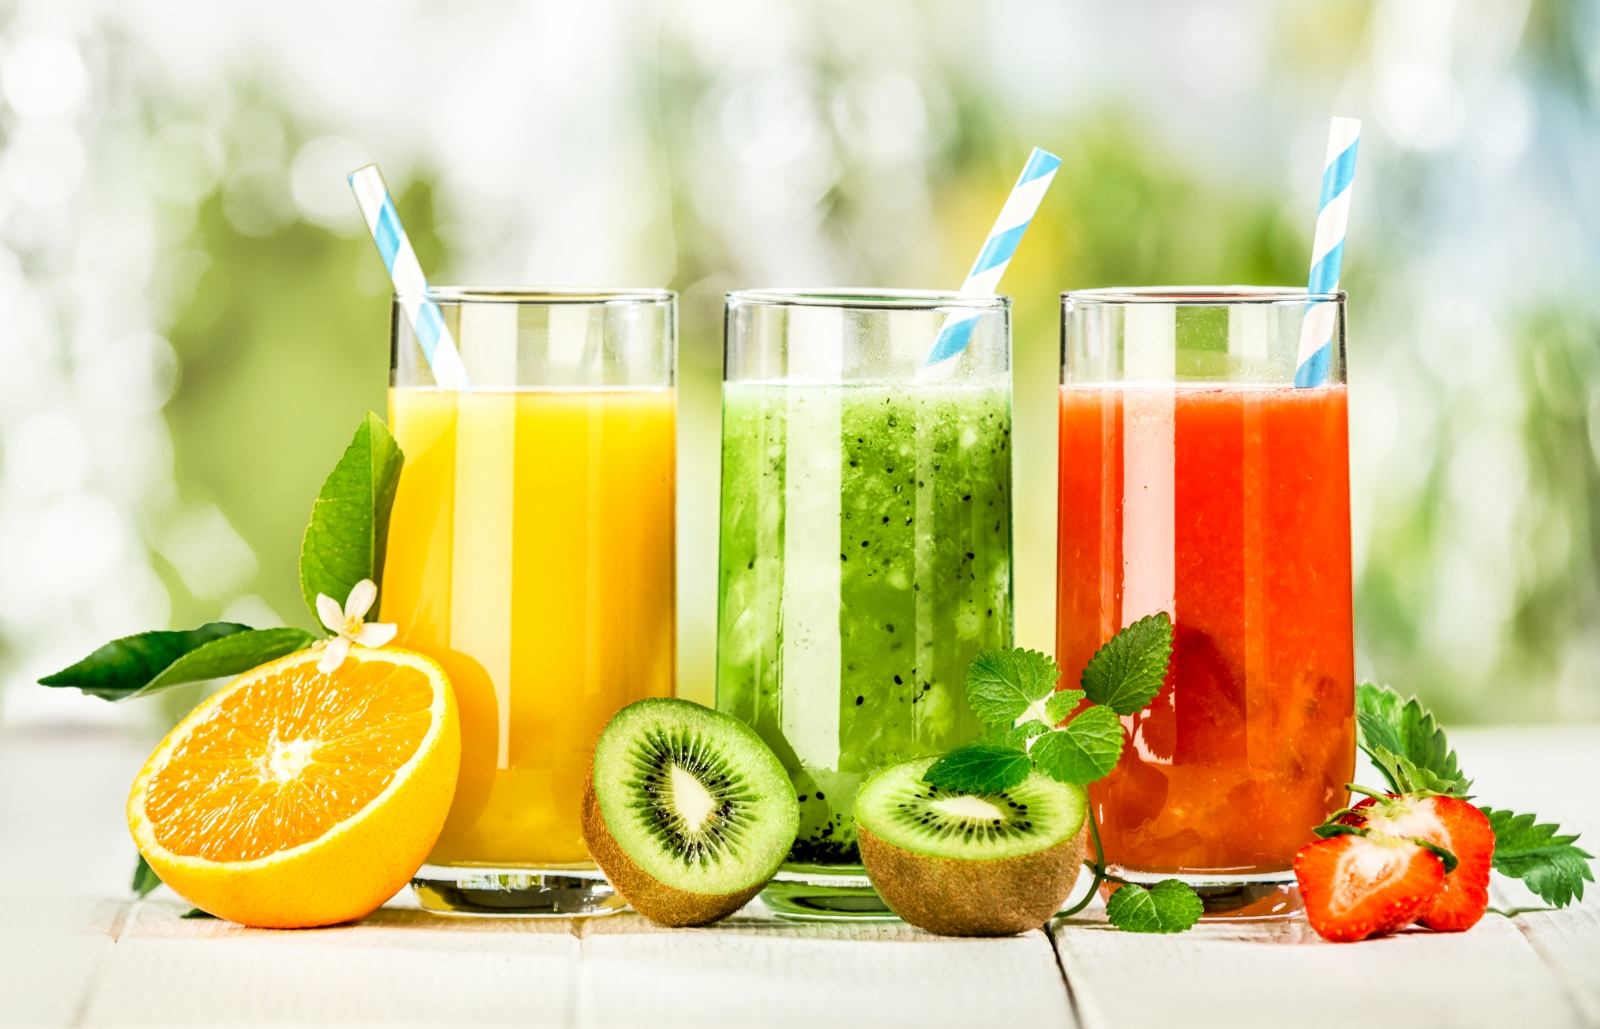 Liquid Vitamin Nutrition is Your Key to Good Health